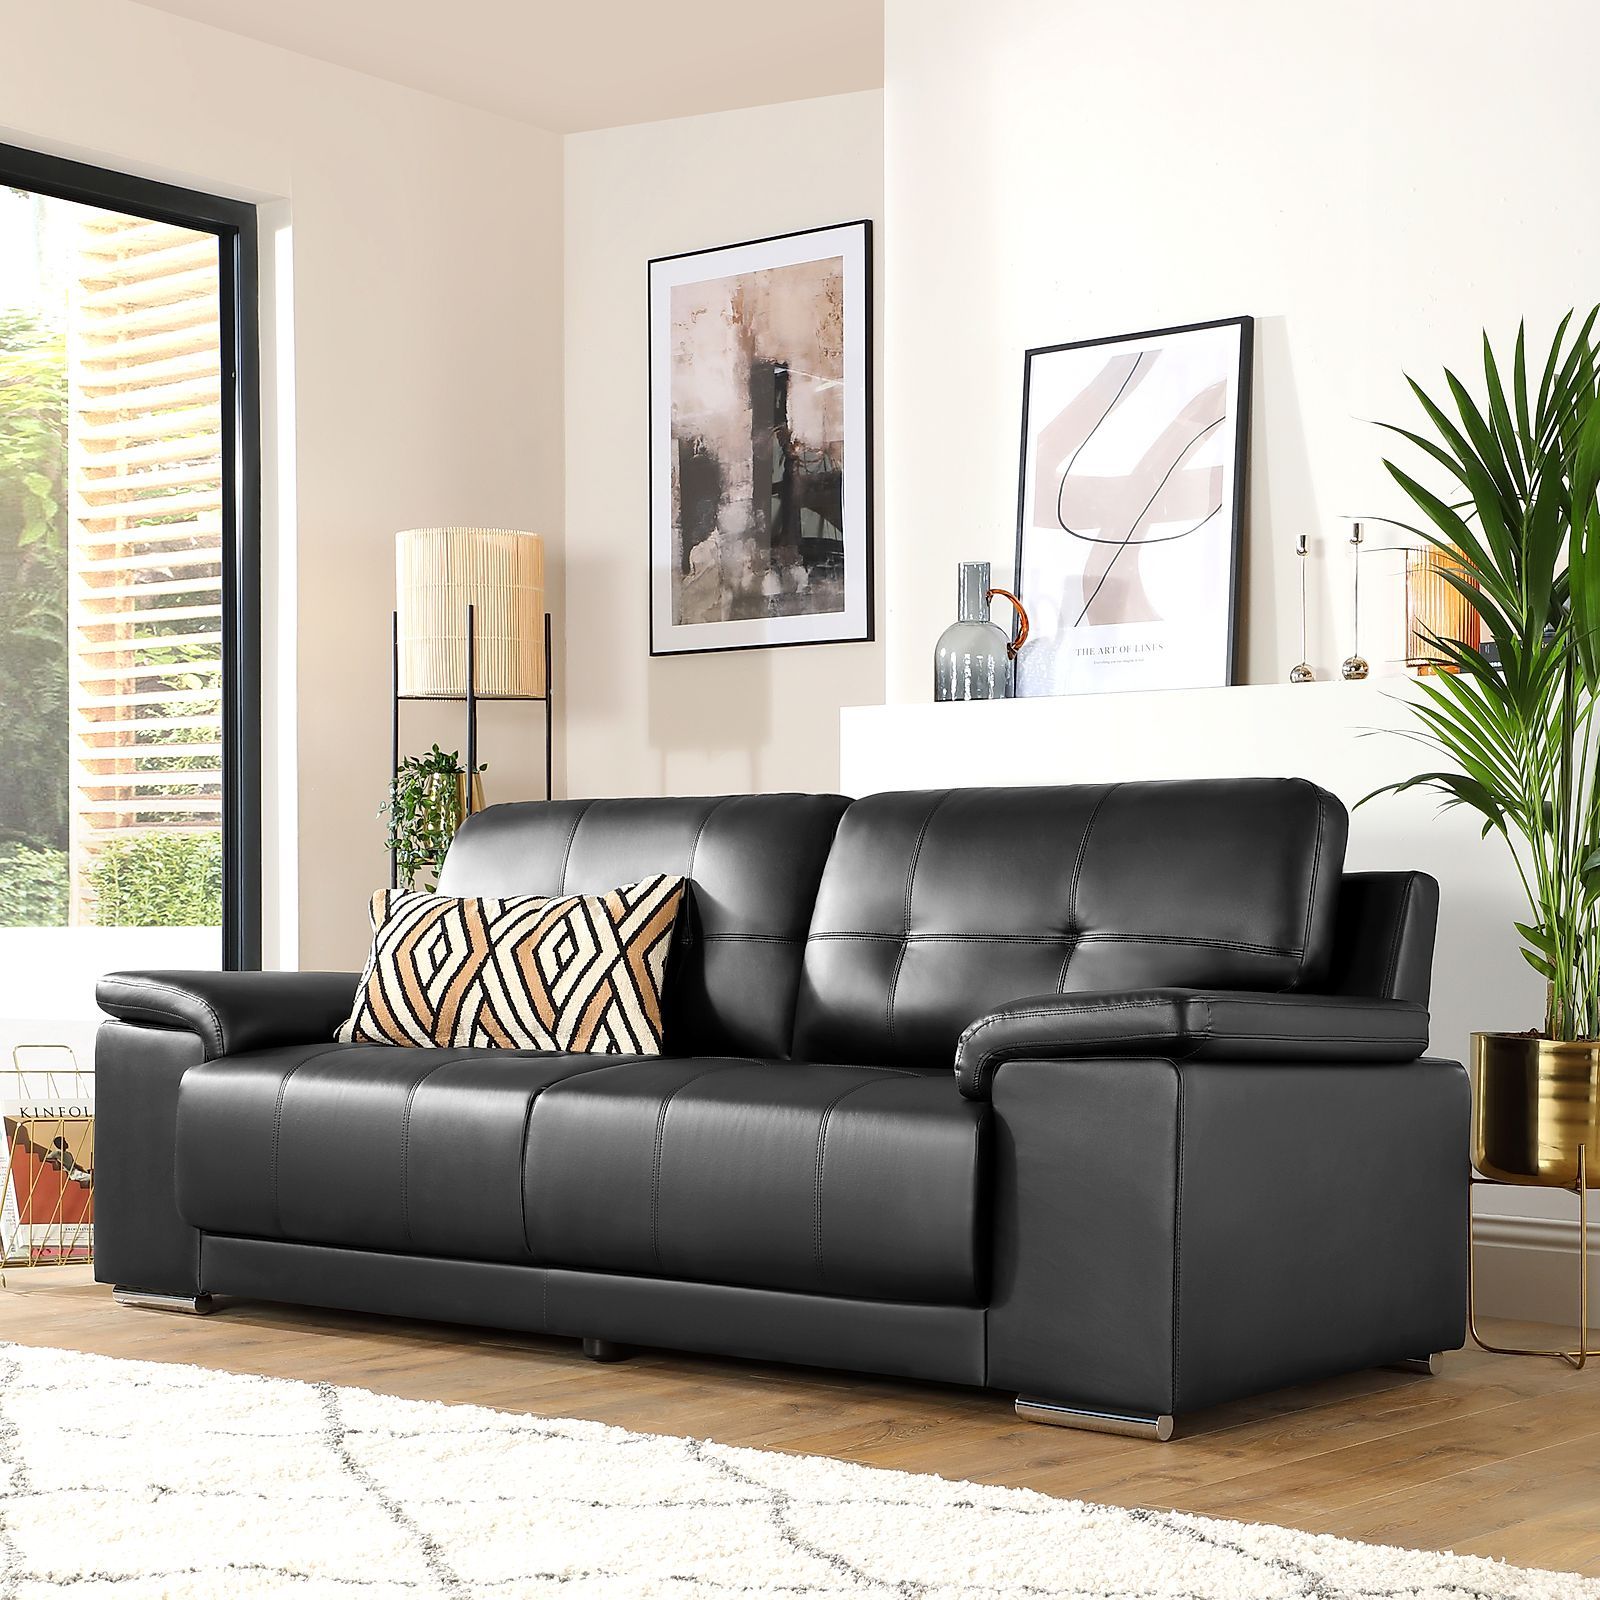 Kansas Black Leather 3 Seater Sofa | Furniture Choice With Sofas In Black (Gallery 4 of 20)